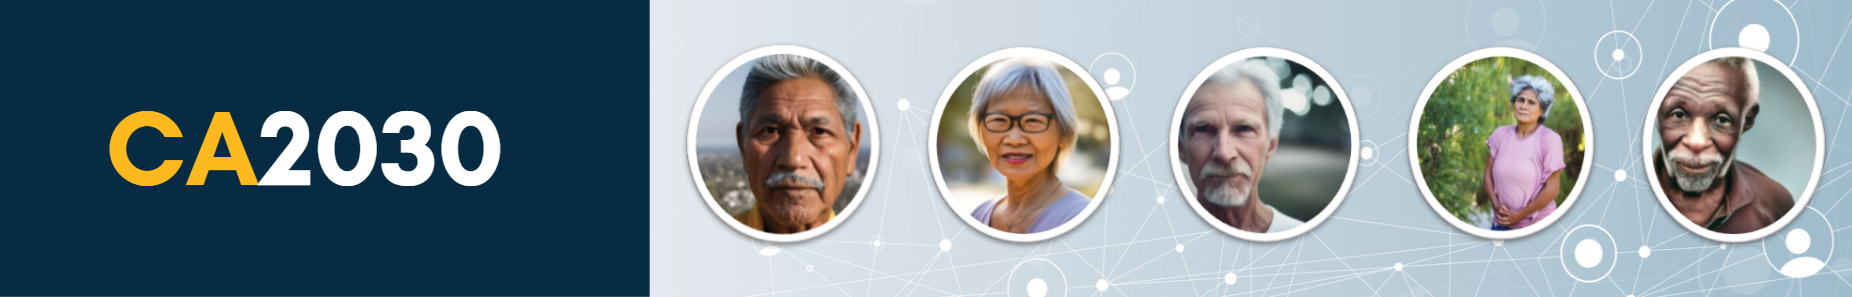 CA2030 text with images of diverse older adults